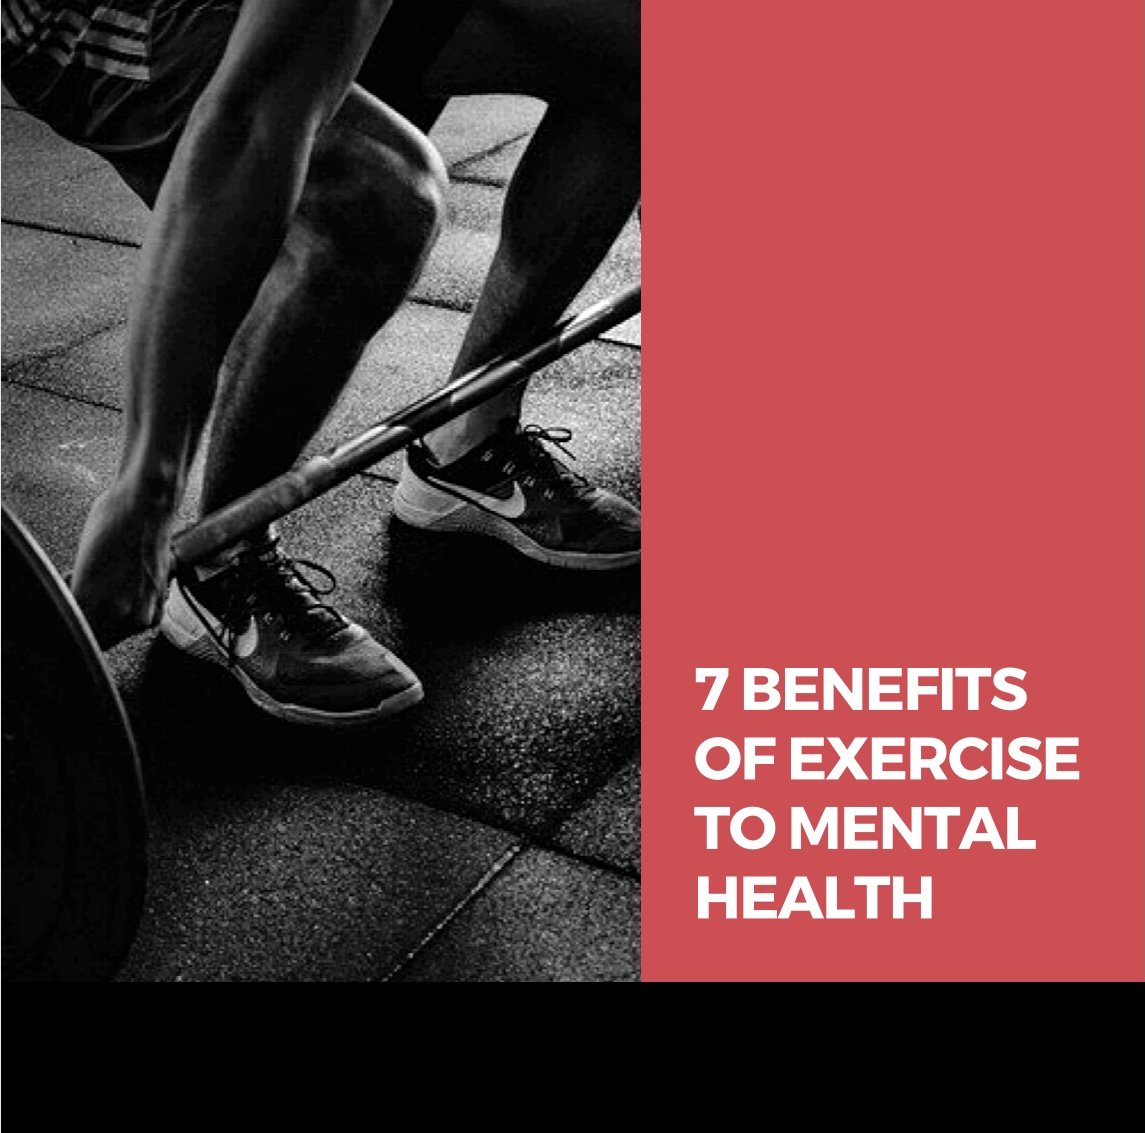 7 Benefits of Exercise to Mental Health